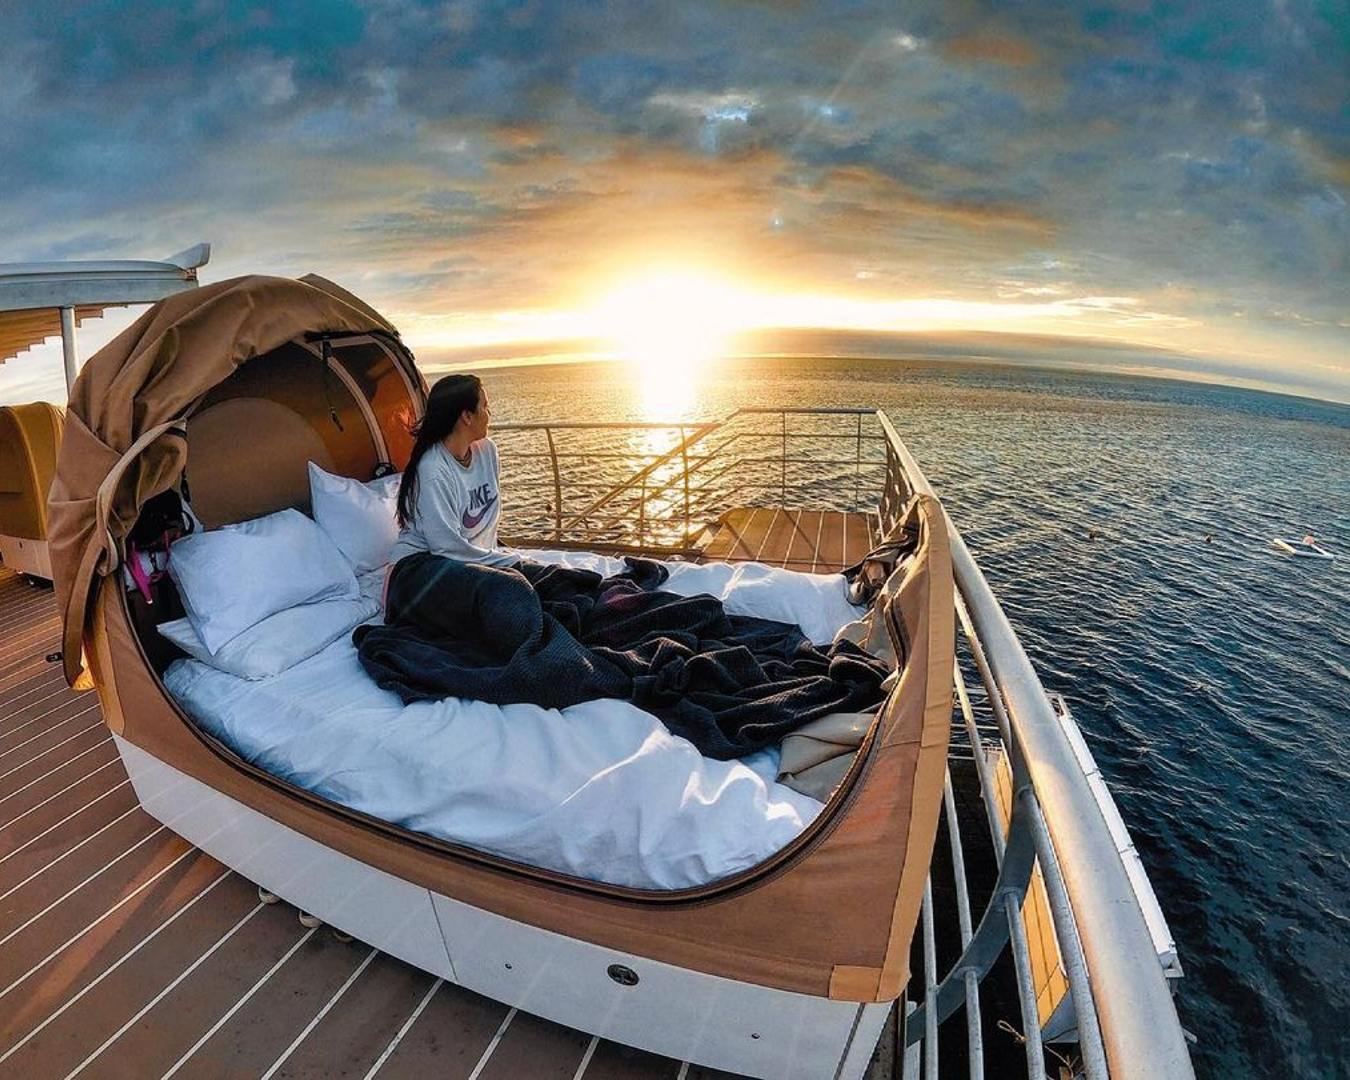 A custom made bed on the deck of a ship looking over the ocean